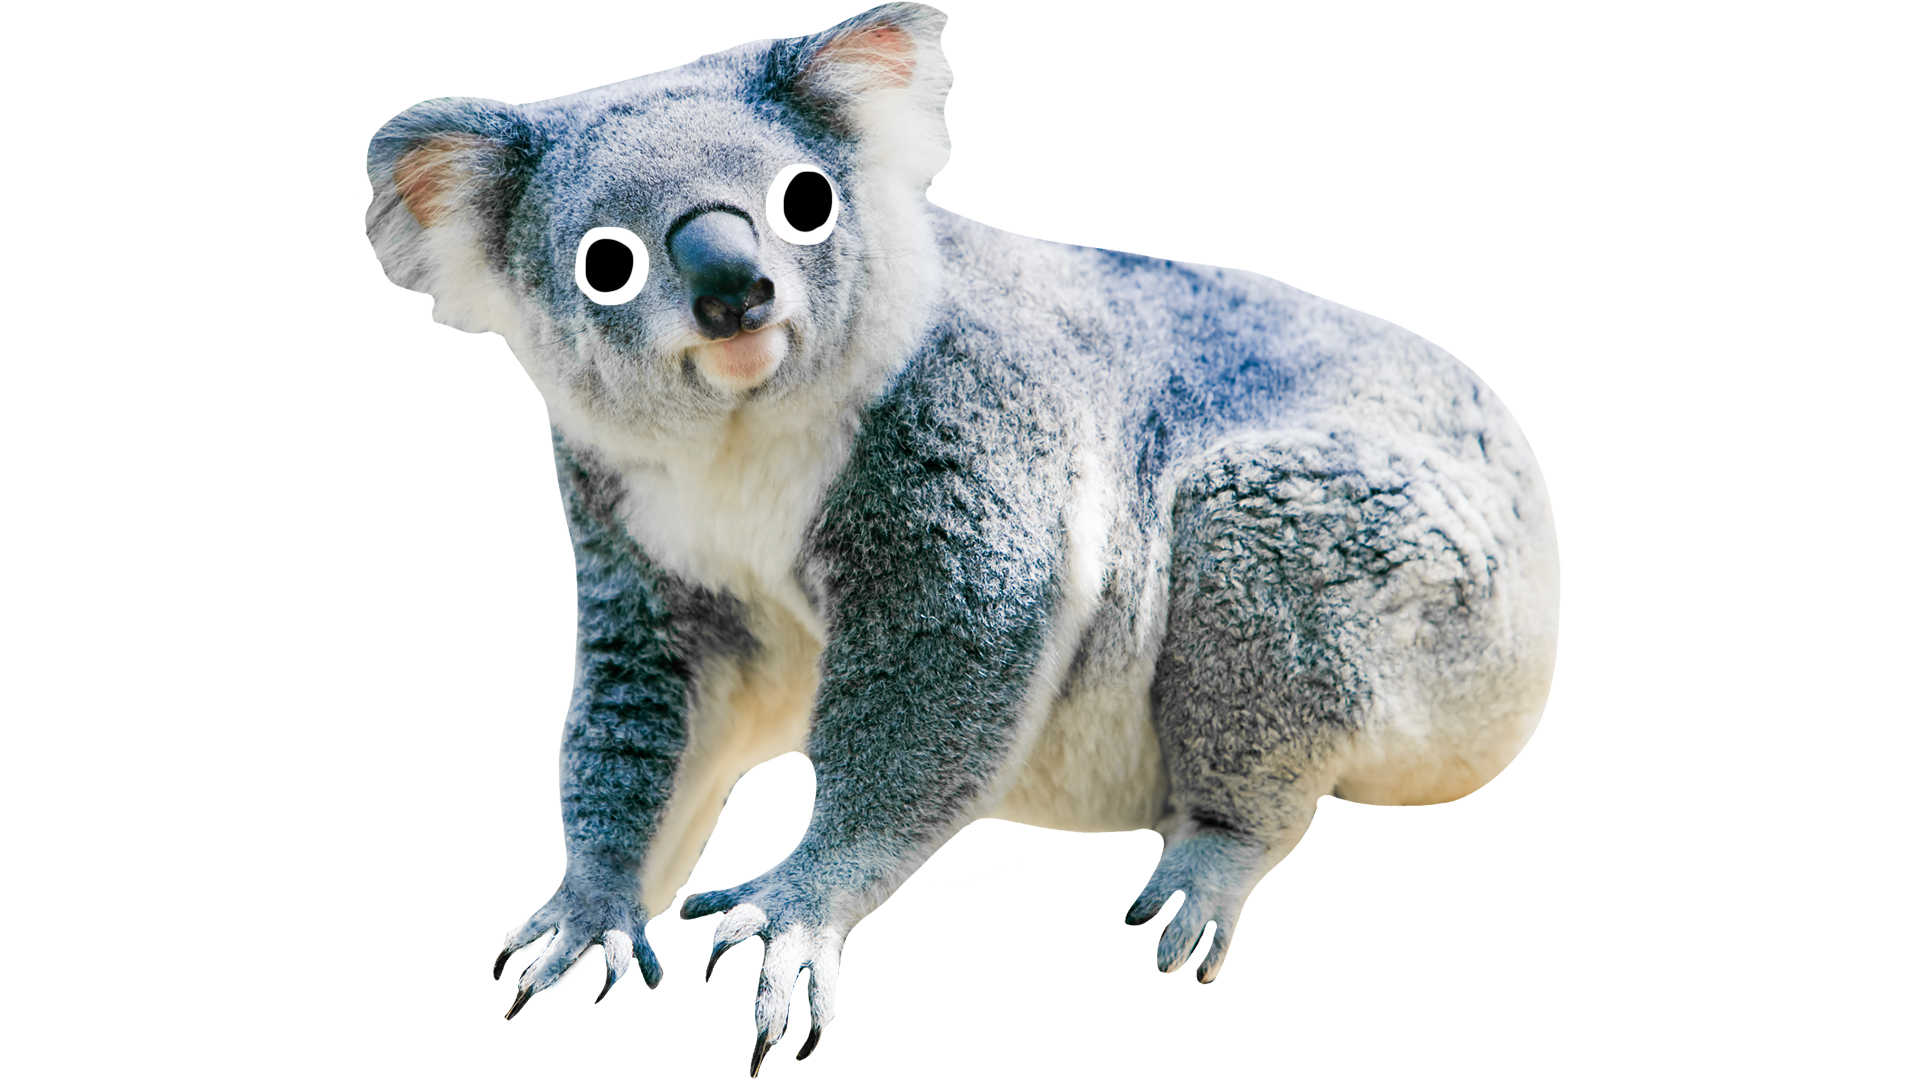 It's a koala looking very pleased with themselves